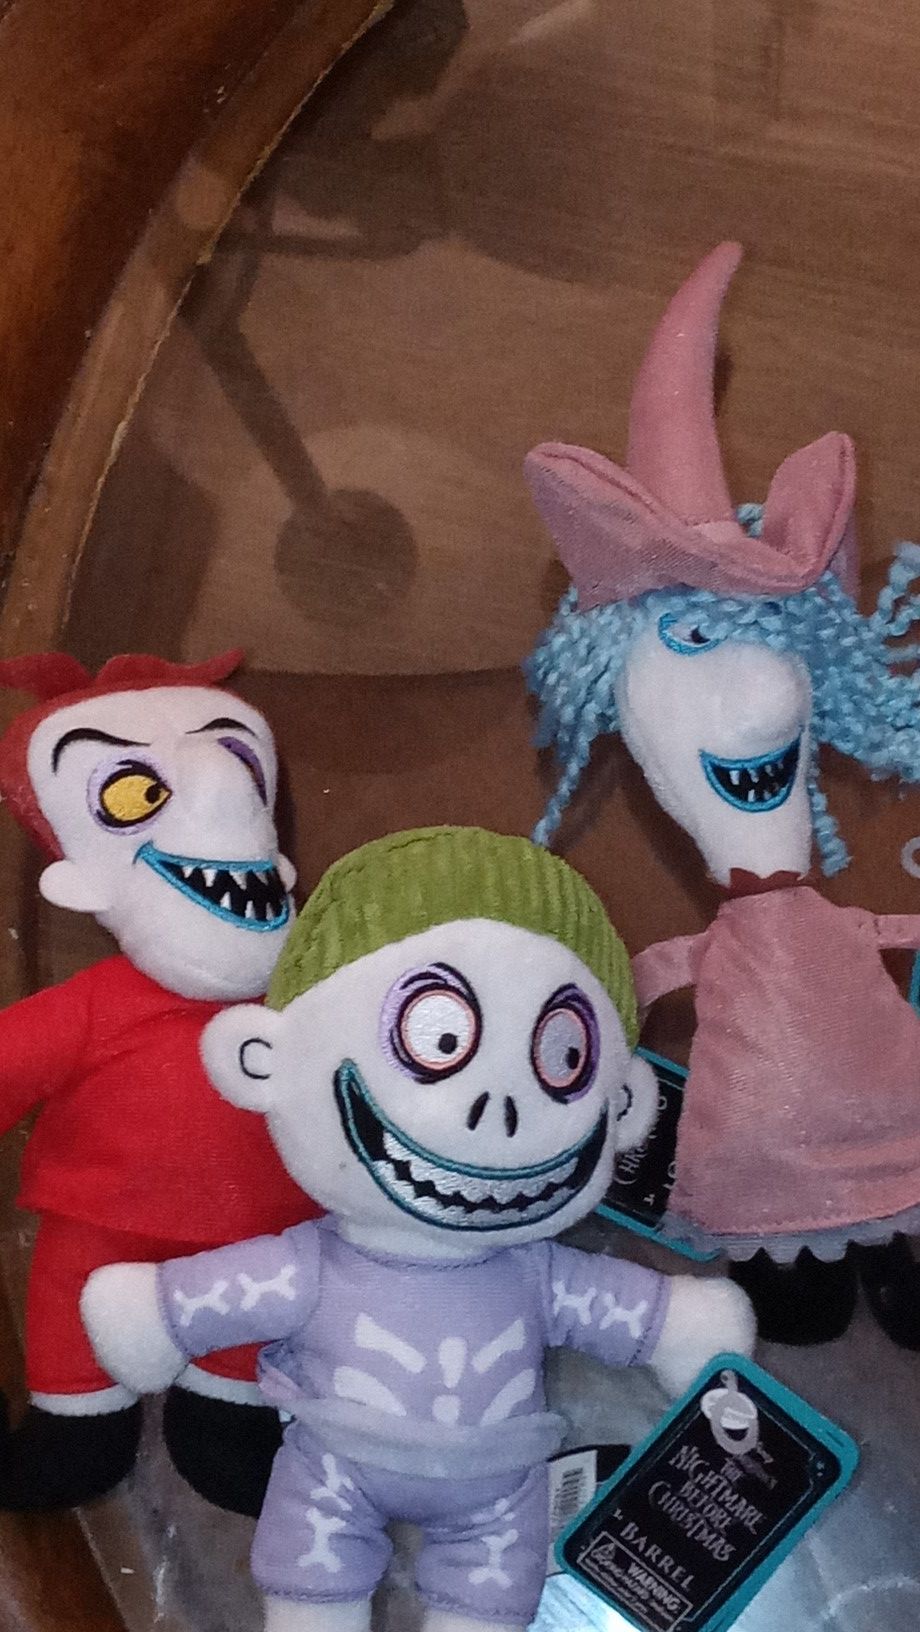 The nightmare before Christmas dolls